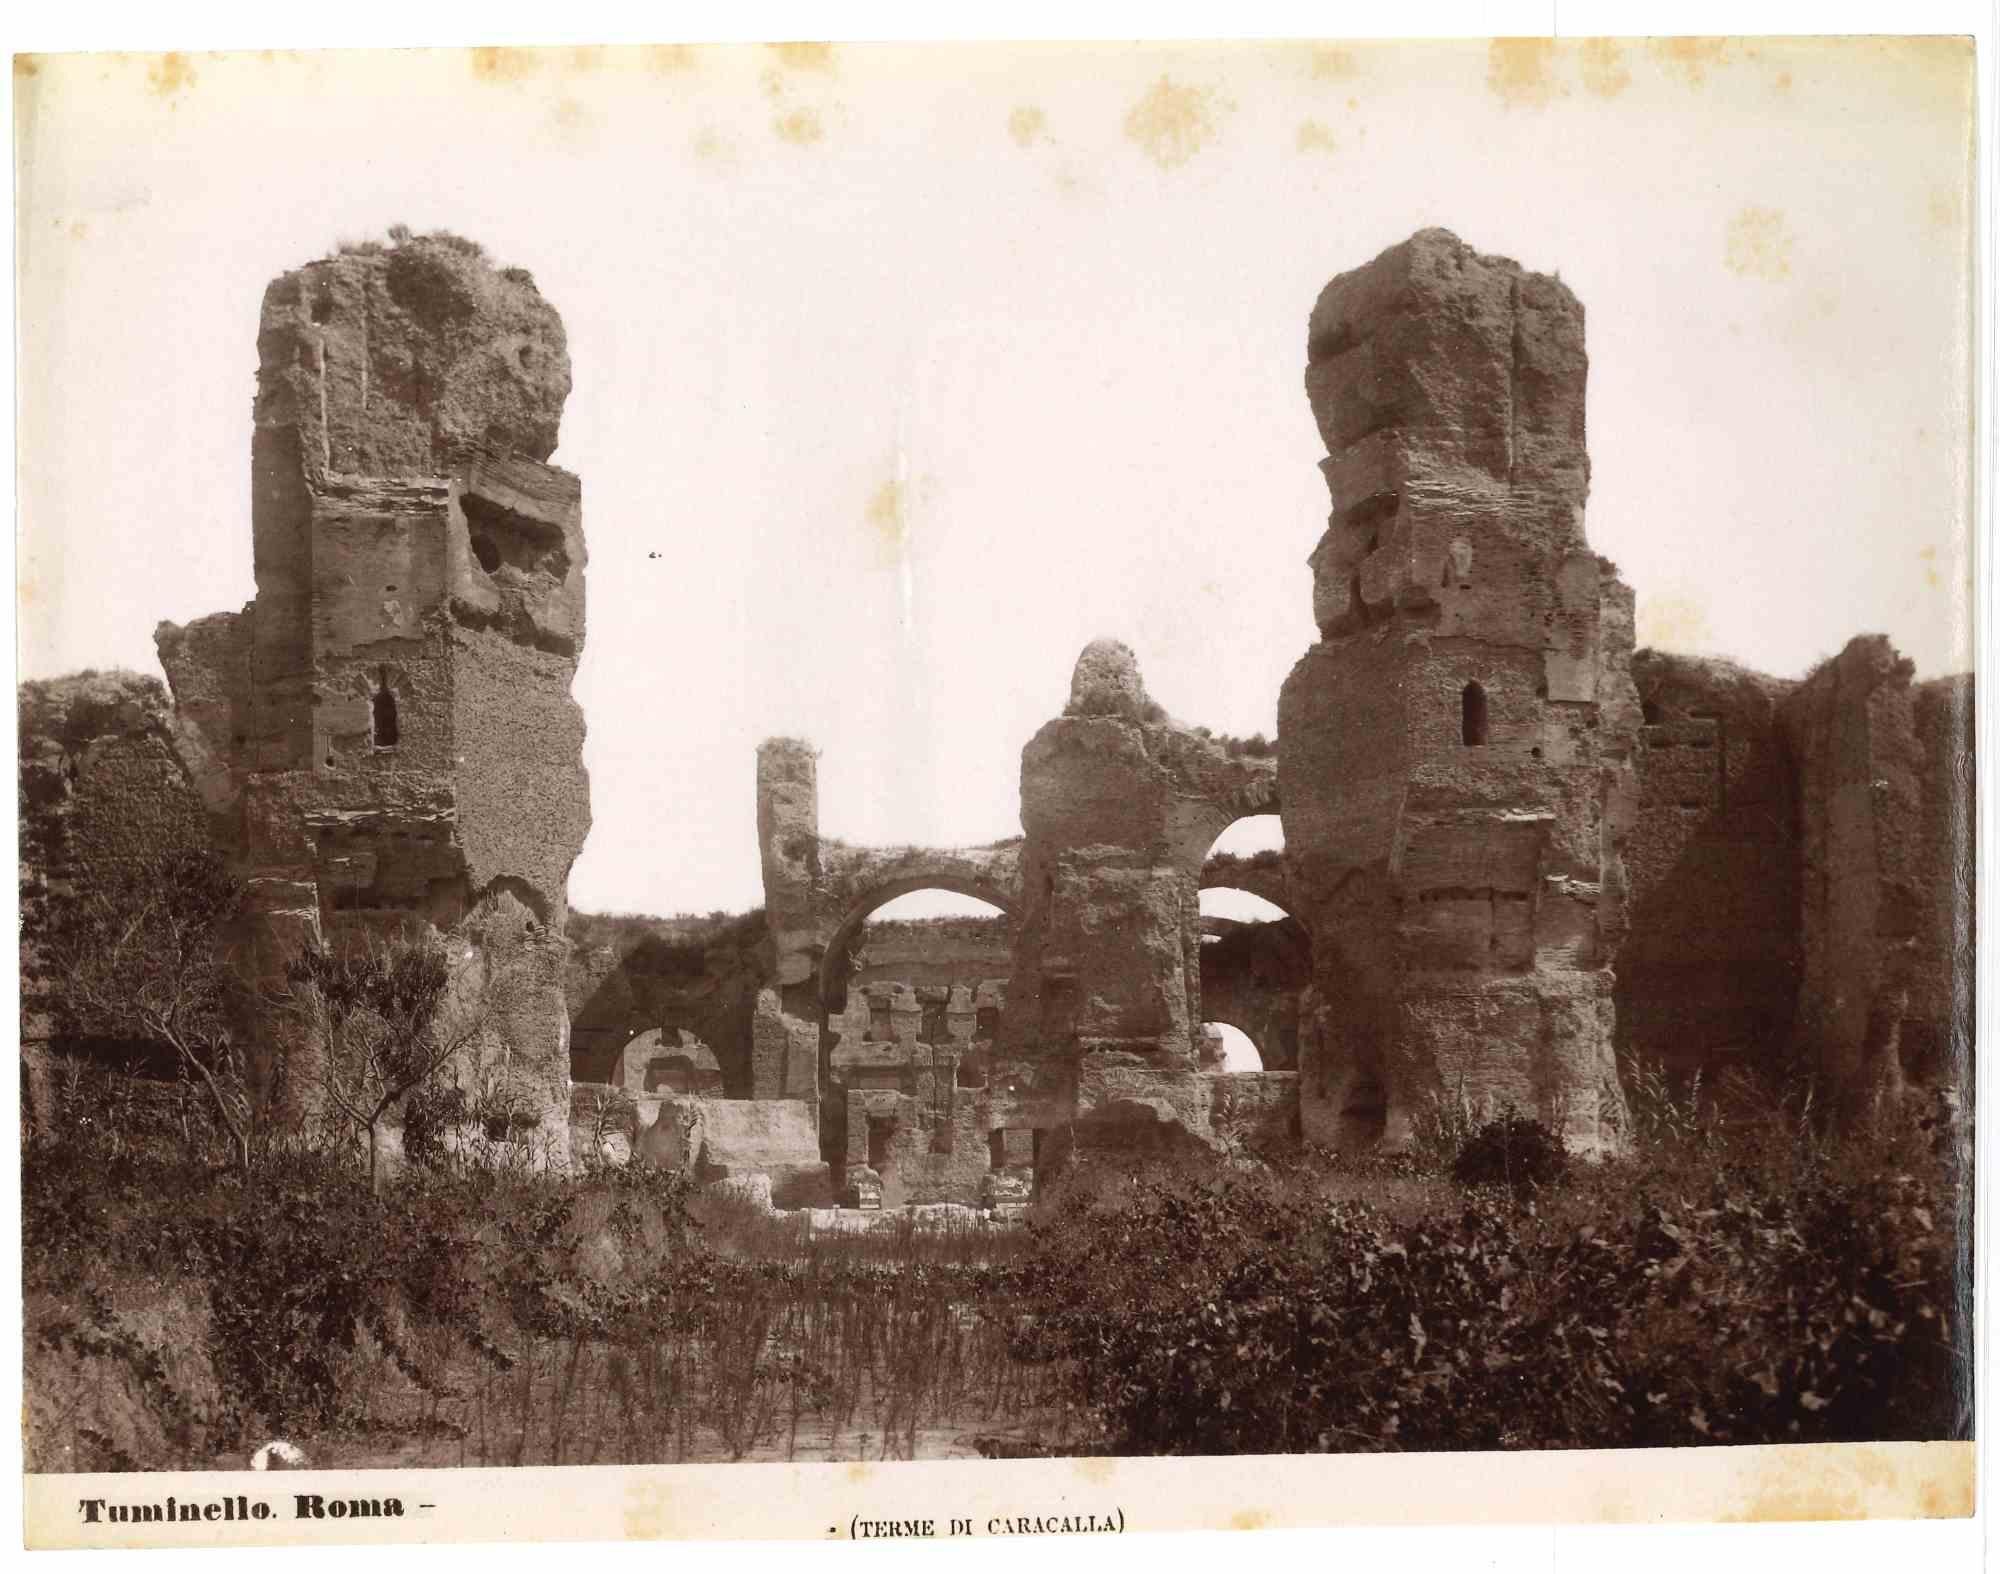 Baths of Caracalla - Vintage Photo by Ludovico Tuminello - Early 20th Century